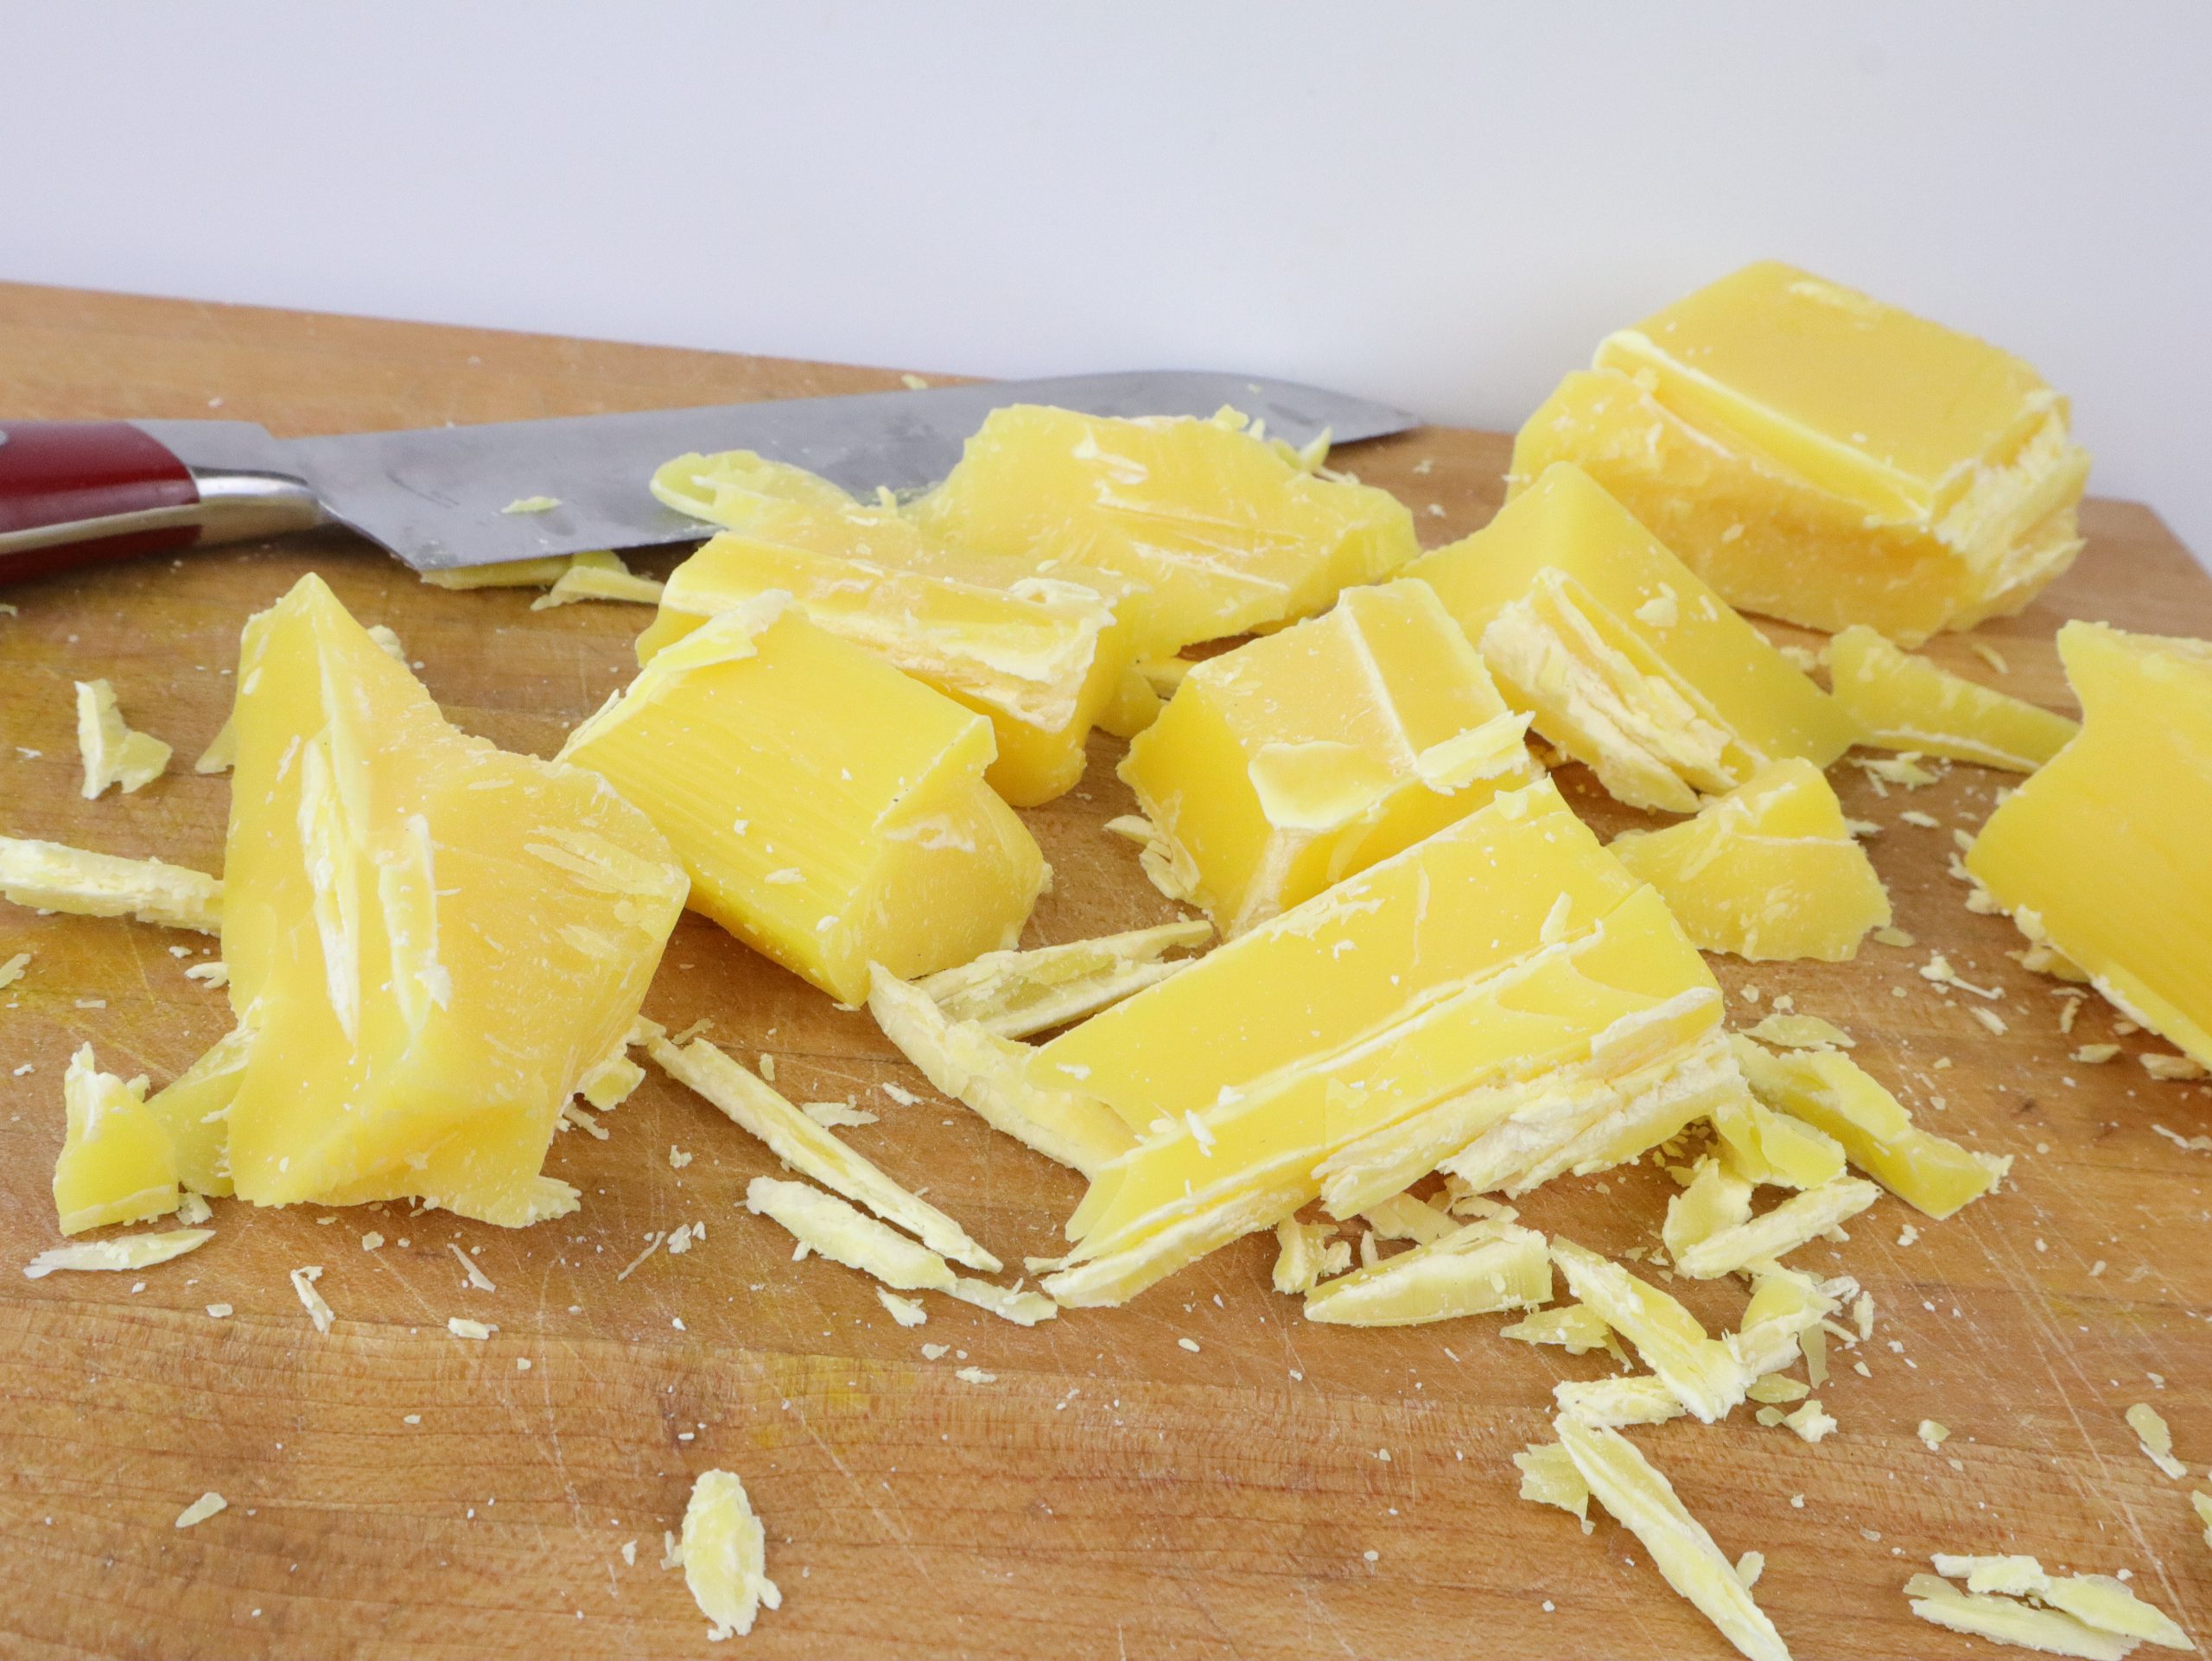 chunks of beeswax chopped up on a wooden cutting board with a knife